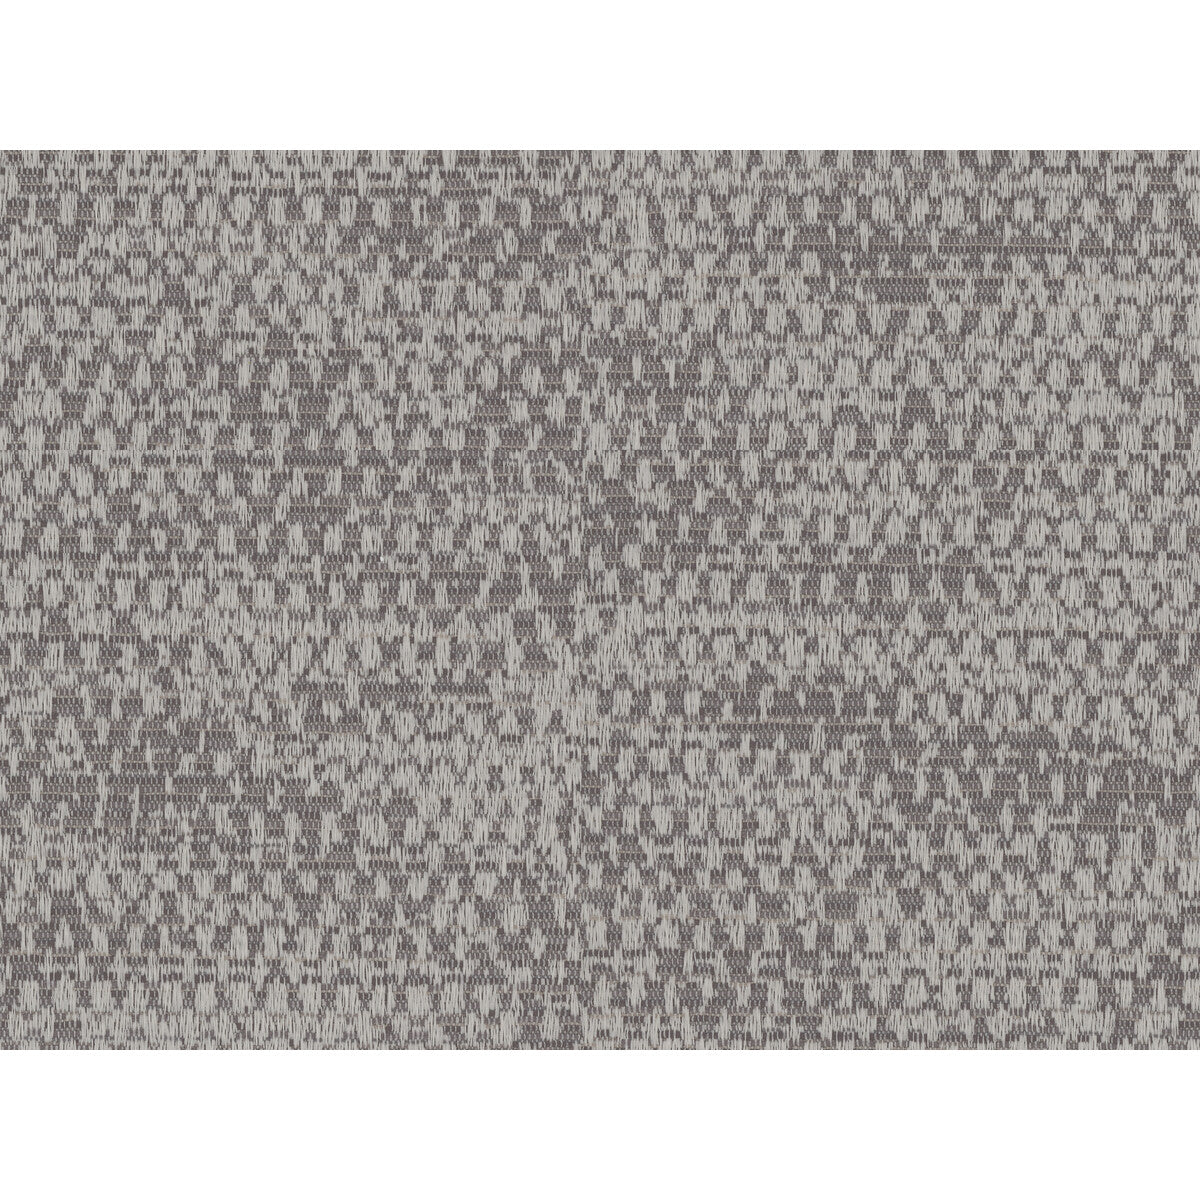 Fearless fabric in quarry color - pattern 34663.11.0 - by Kravet Contract in the Gis collection